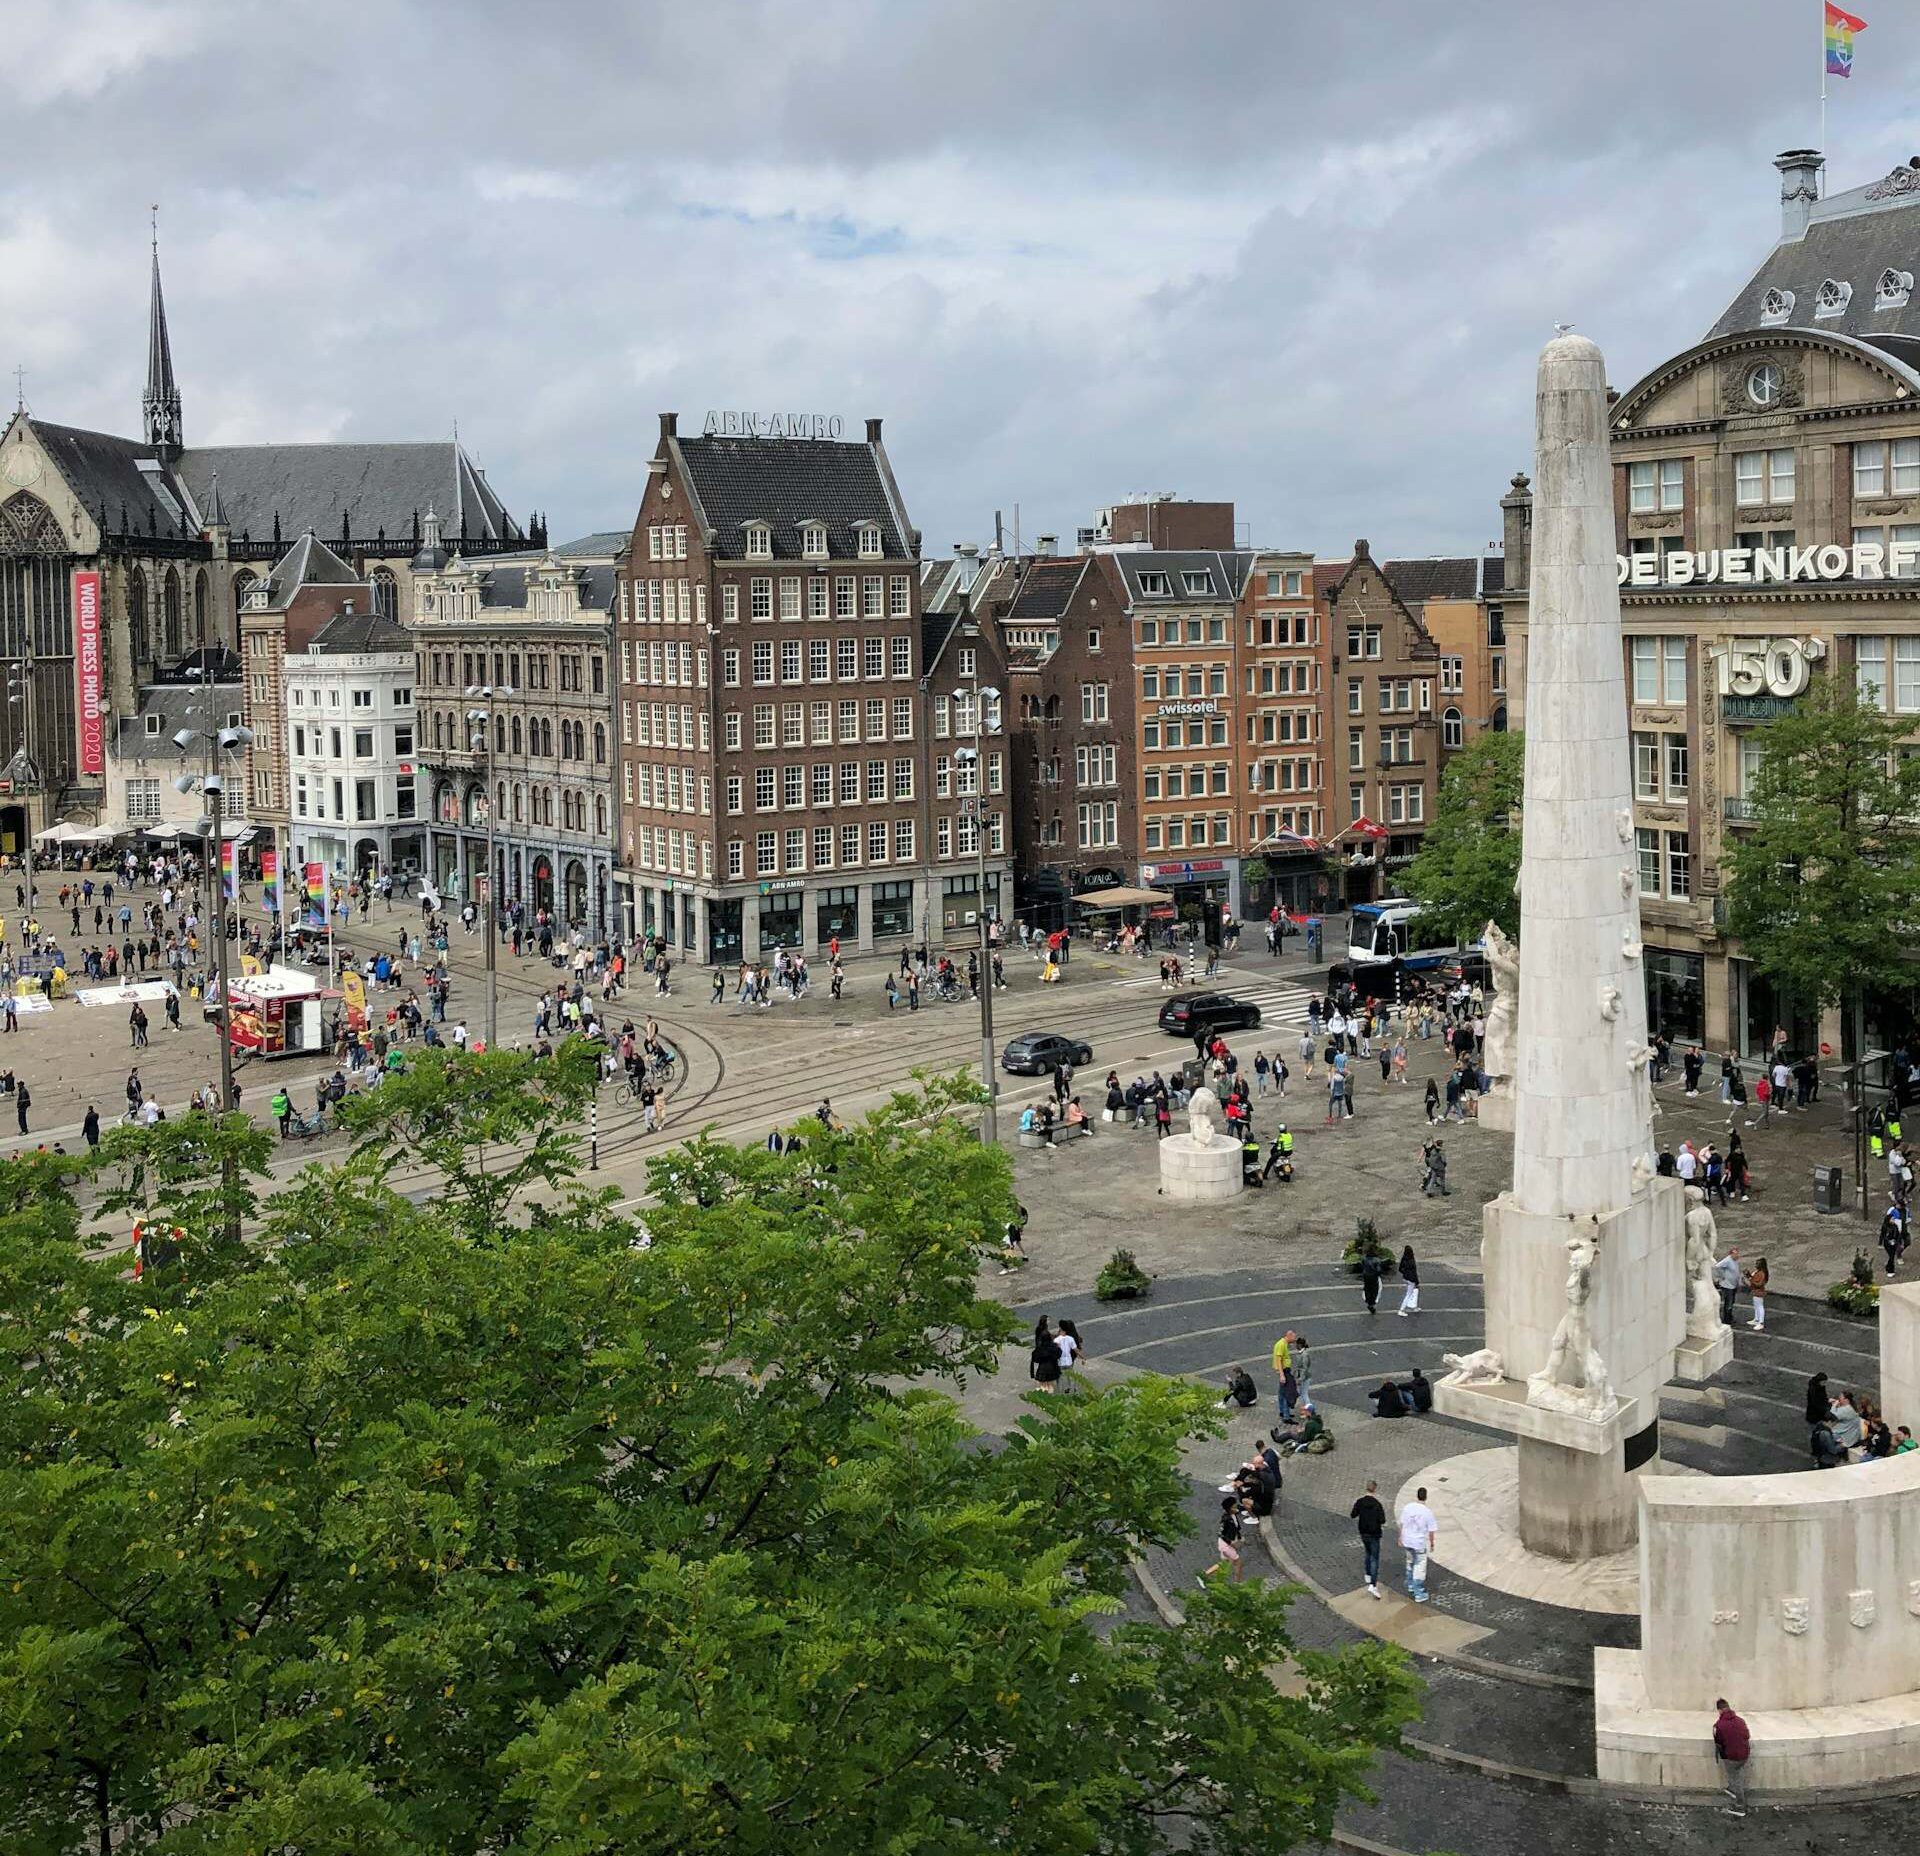 A bustling Dam Square in Amsterdam, surrounded by the Royal Palace and the National Monument, filled with people and lively activities.